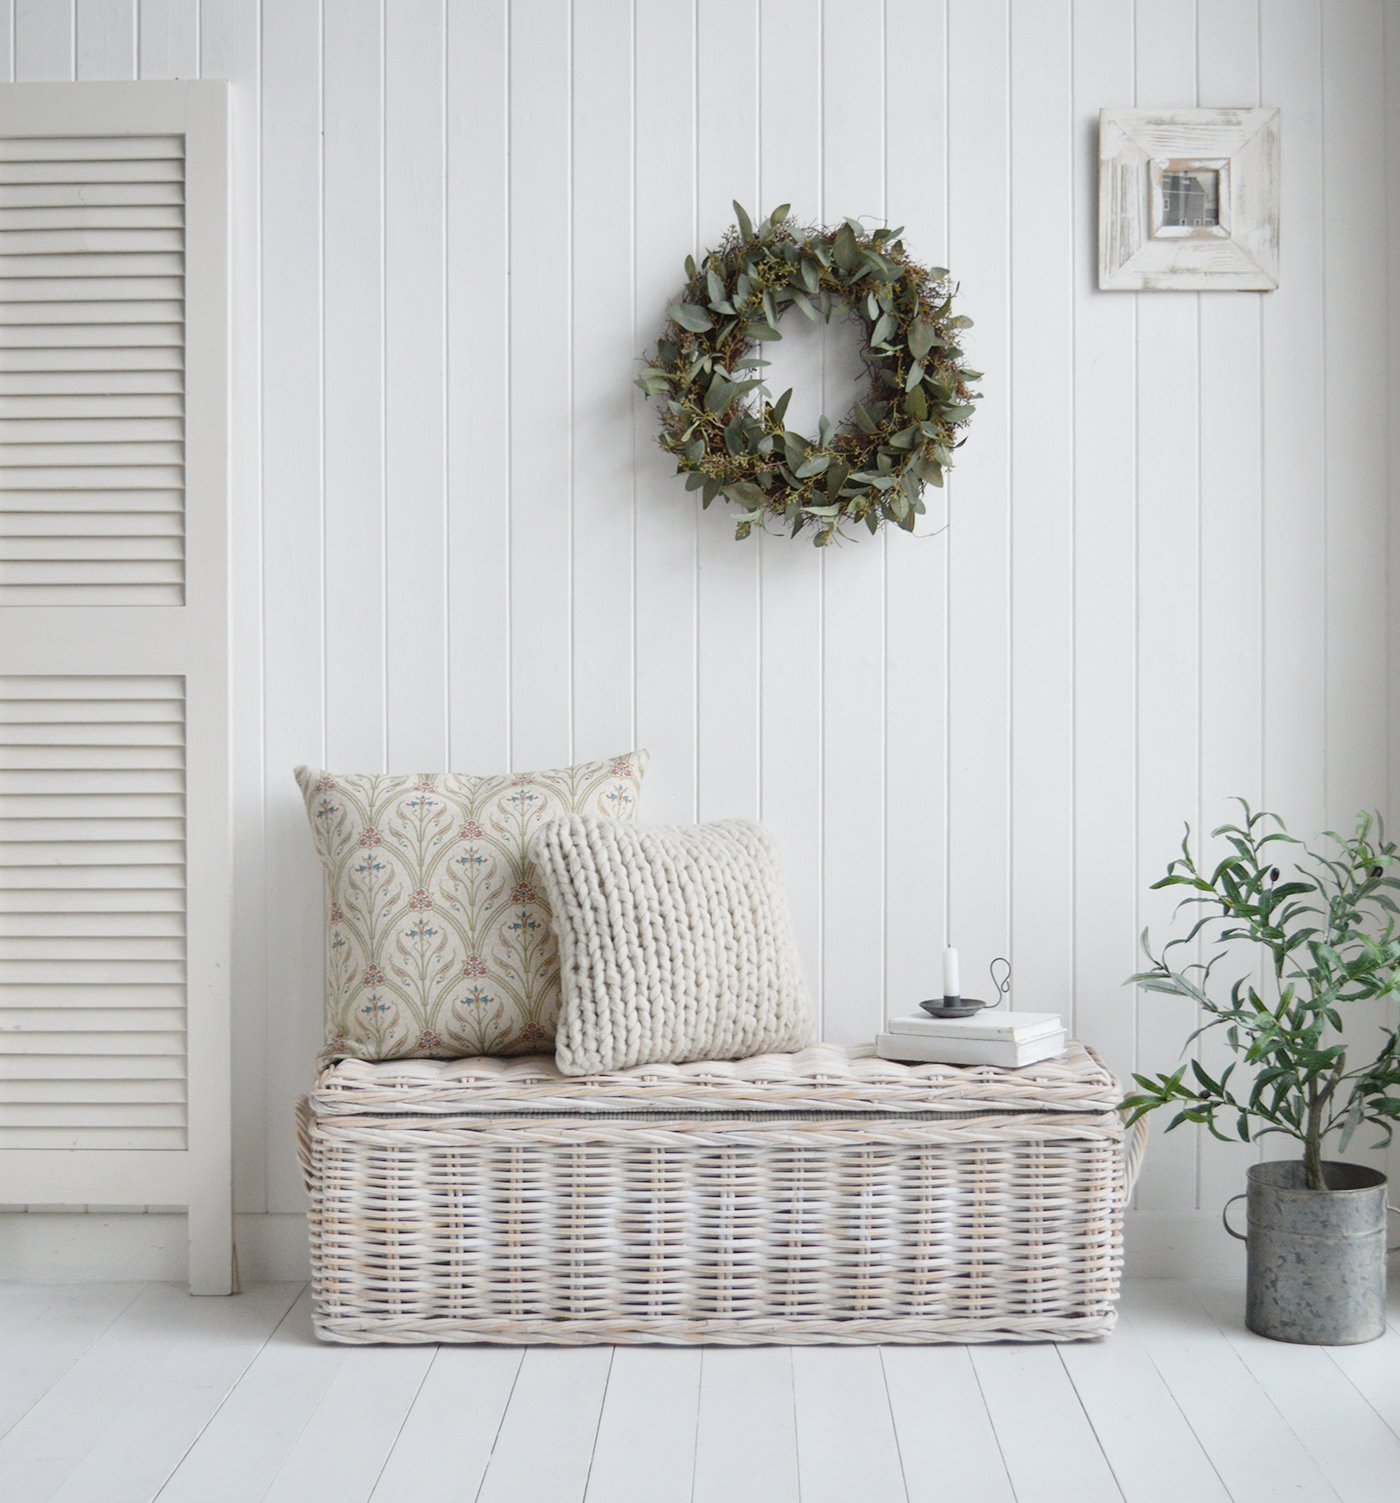 A New England white living room with the Farmington storage bench, Colton luxurious cushion, Faux Eucalyptus wreath and Olive tree in a zinc pot, a beautiful idea for a coastal style interior 